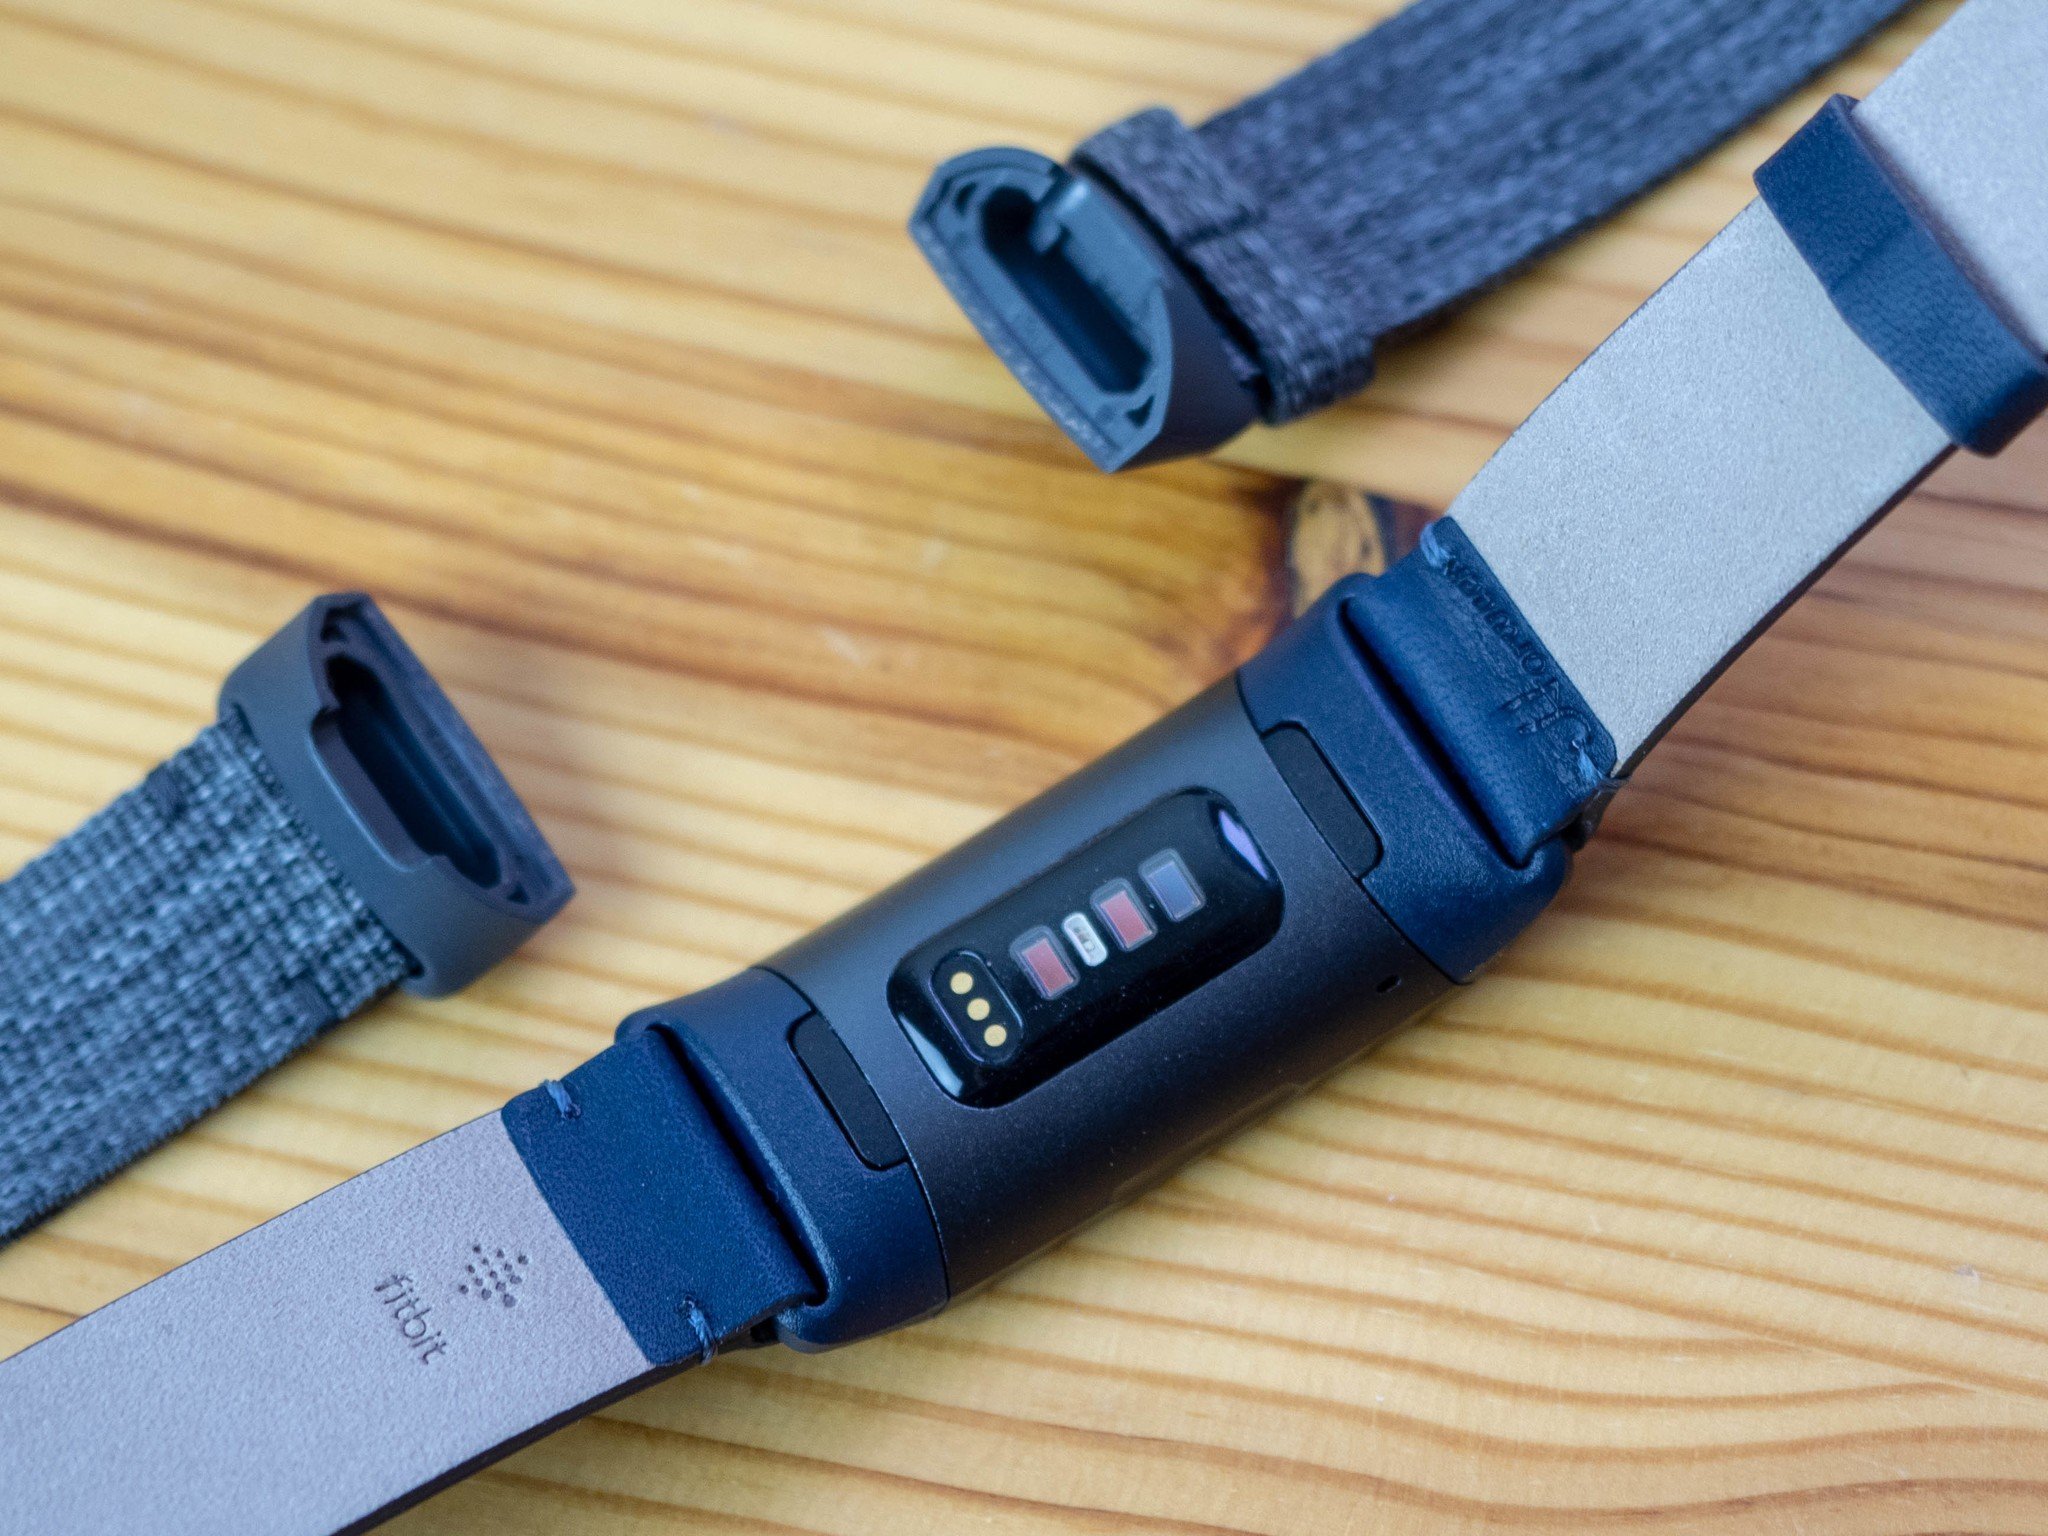 fitbit charge 3s